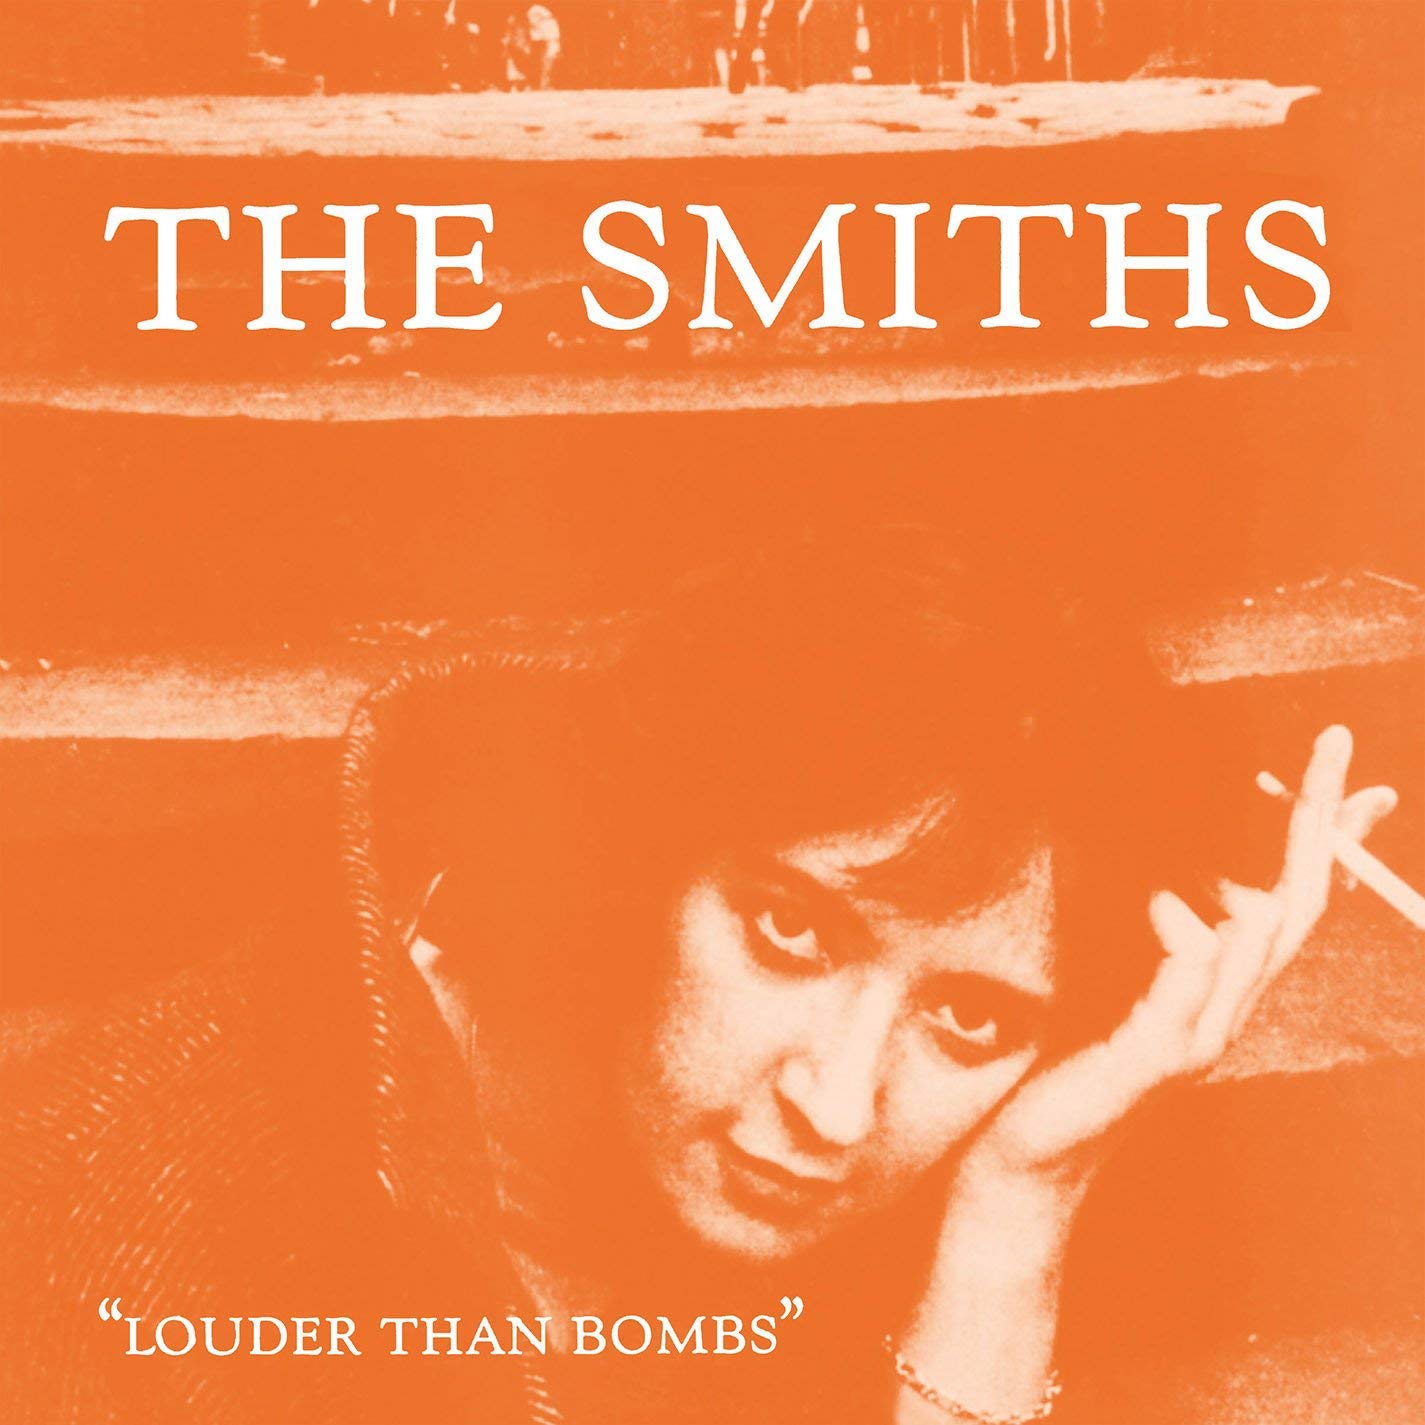 The Smiths "Louder Than Bombs" CD